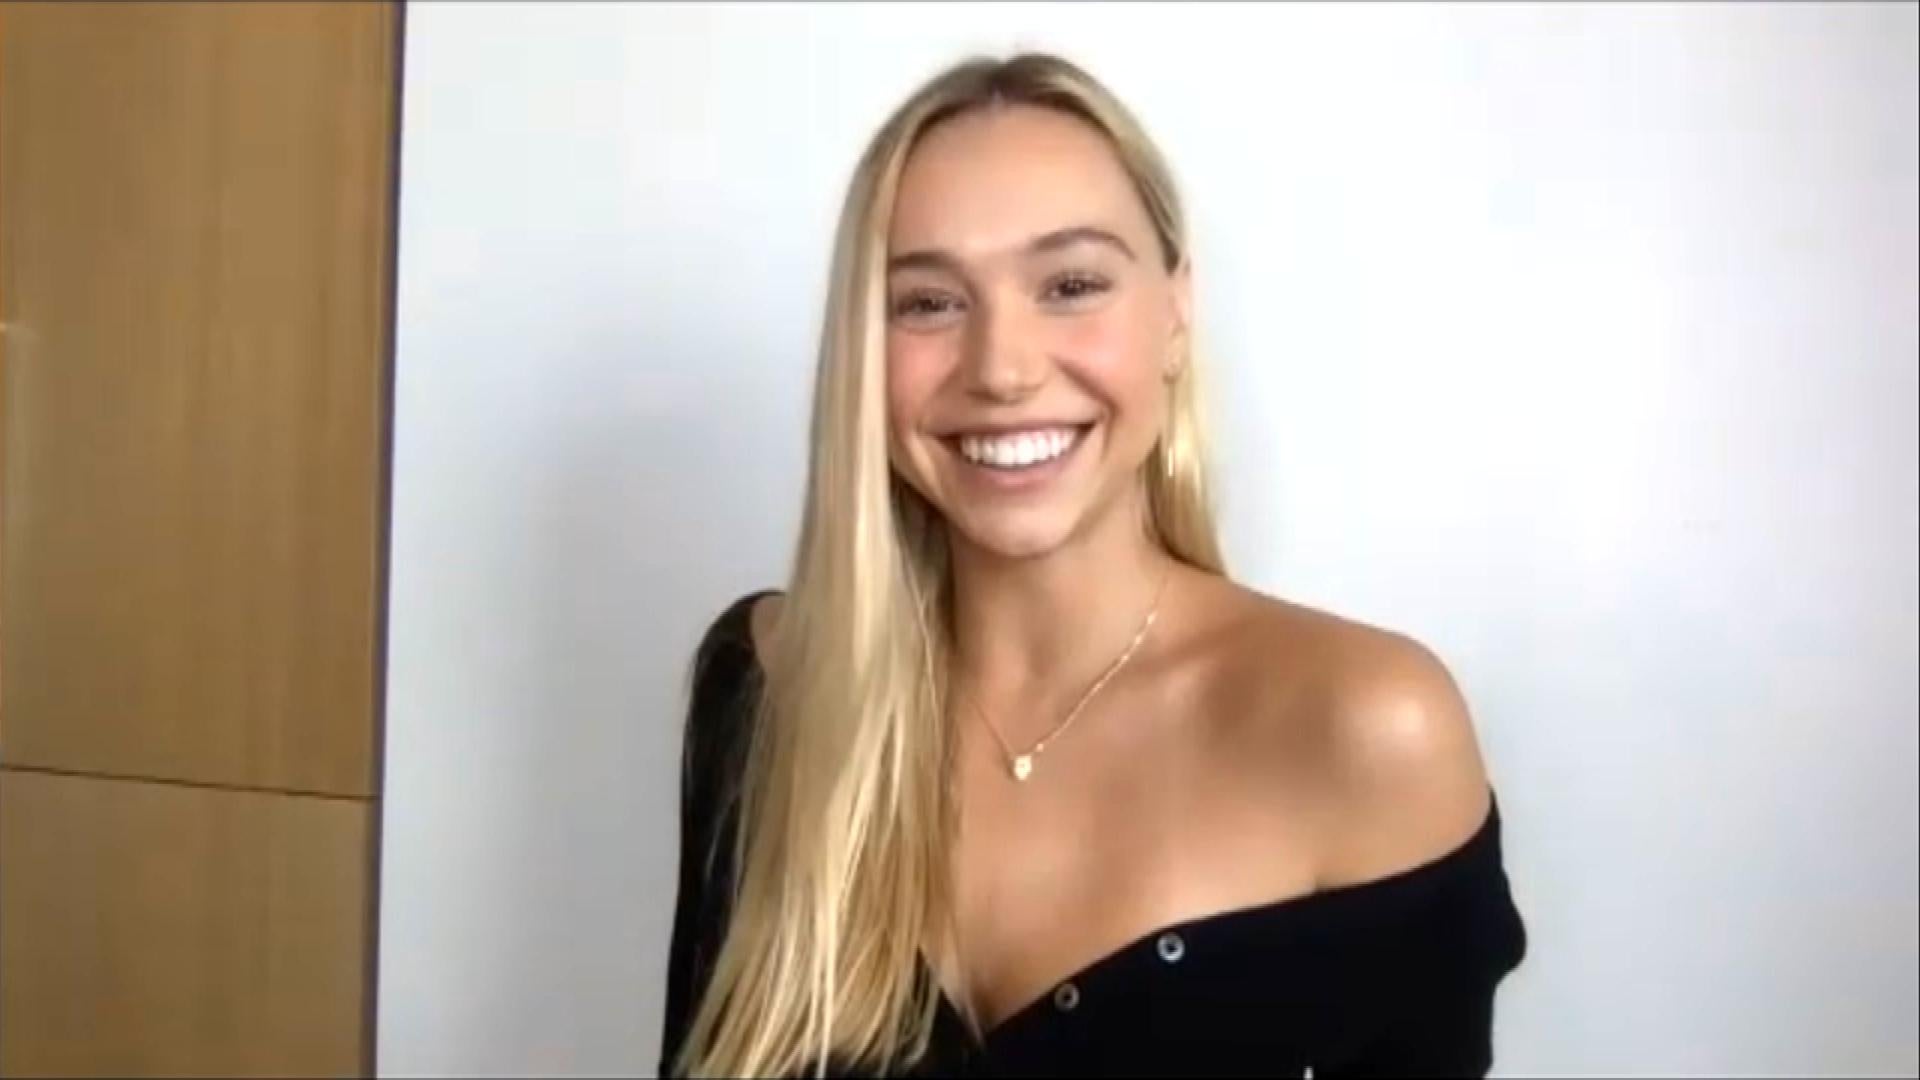 Alexis Ren On Being Super Good Friends With Her Ex Alan Bersten The Launch Of Future Prosperity Entertainment Tonight